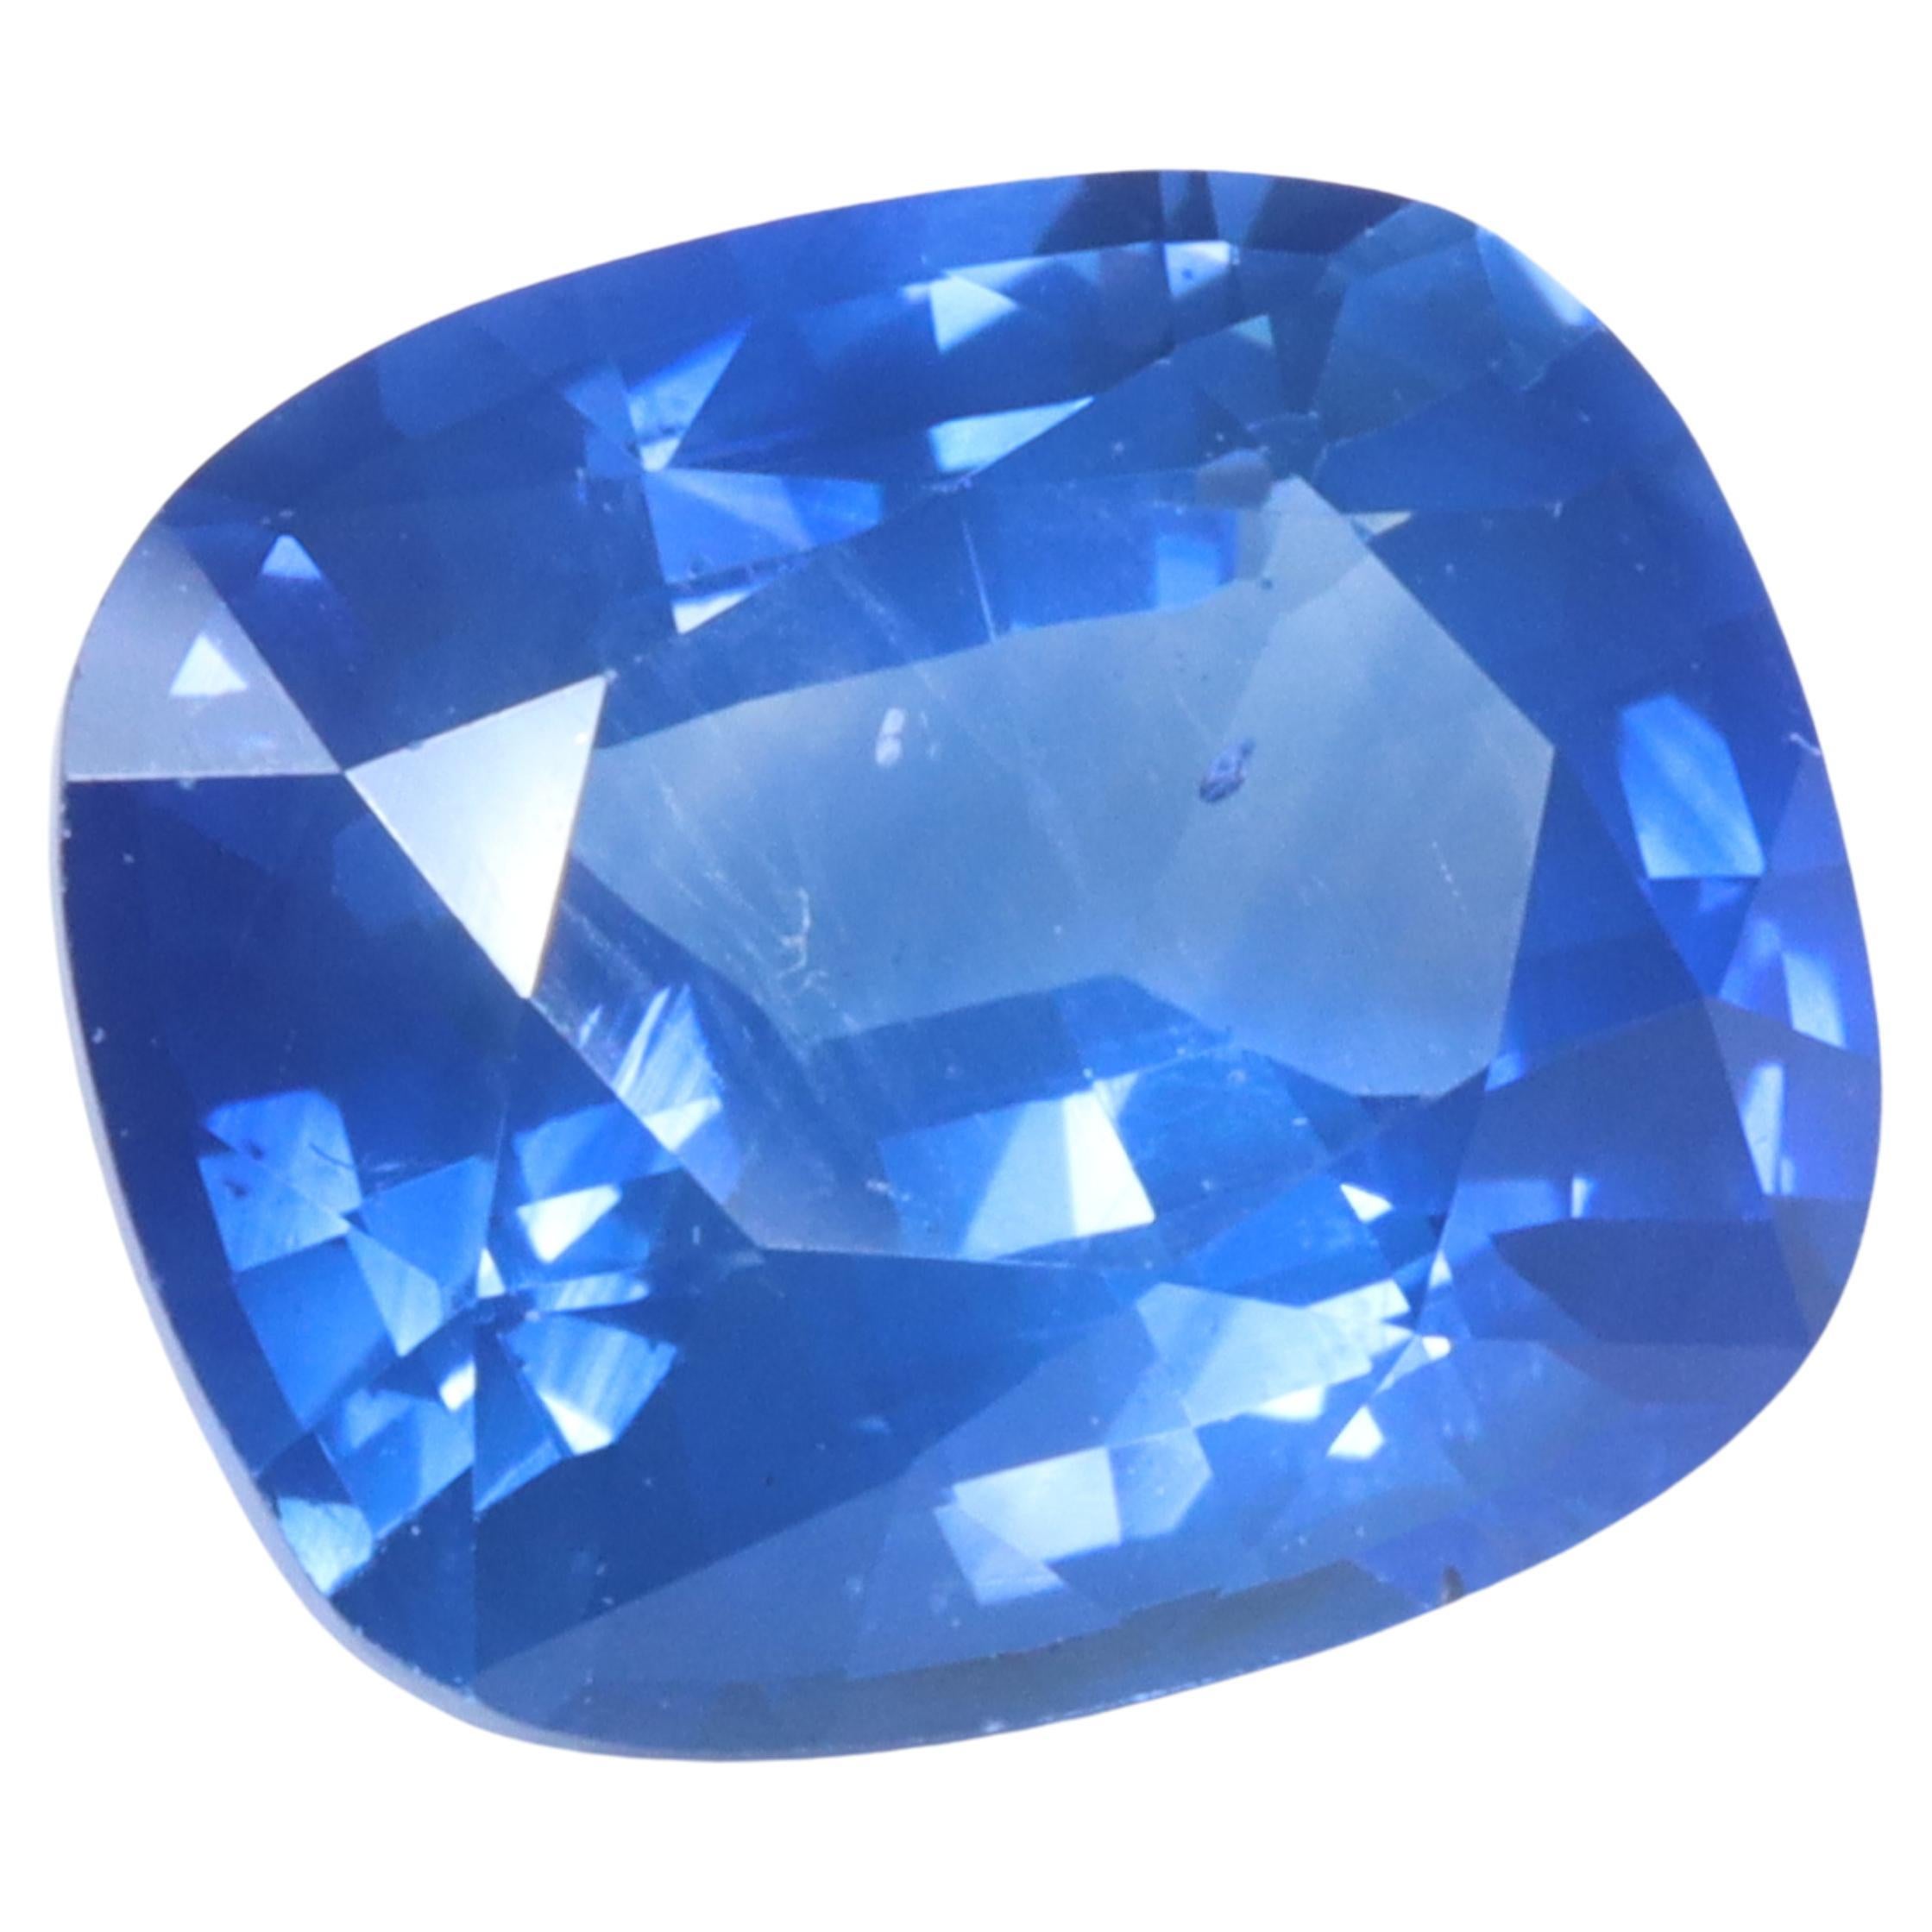 Certified Cushion Cut Intense Blue Sapphire - 2.29ct For Sale